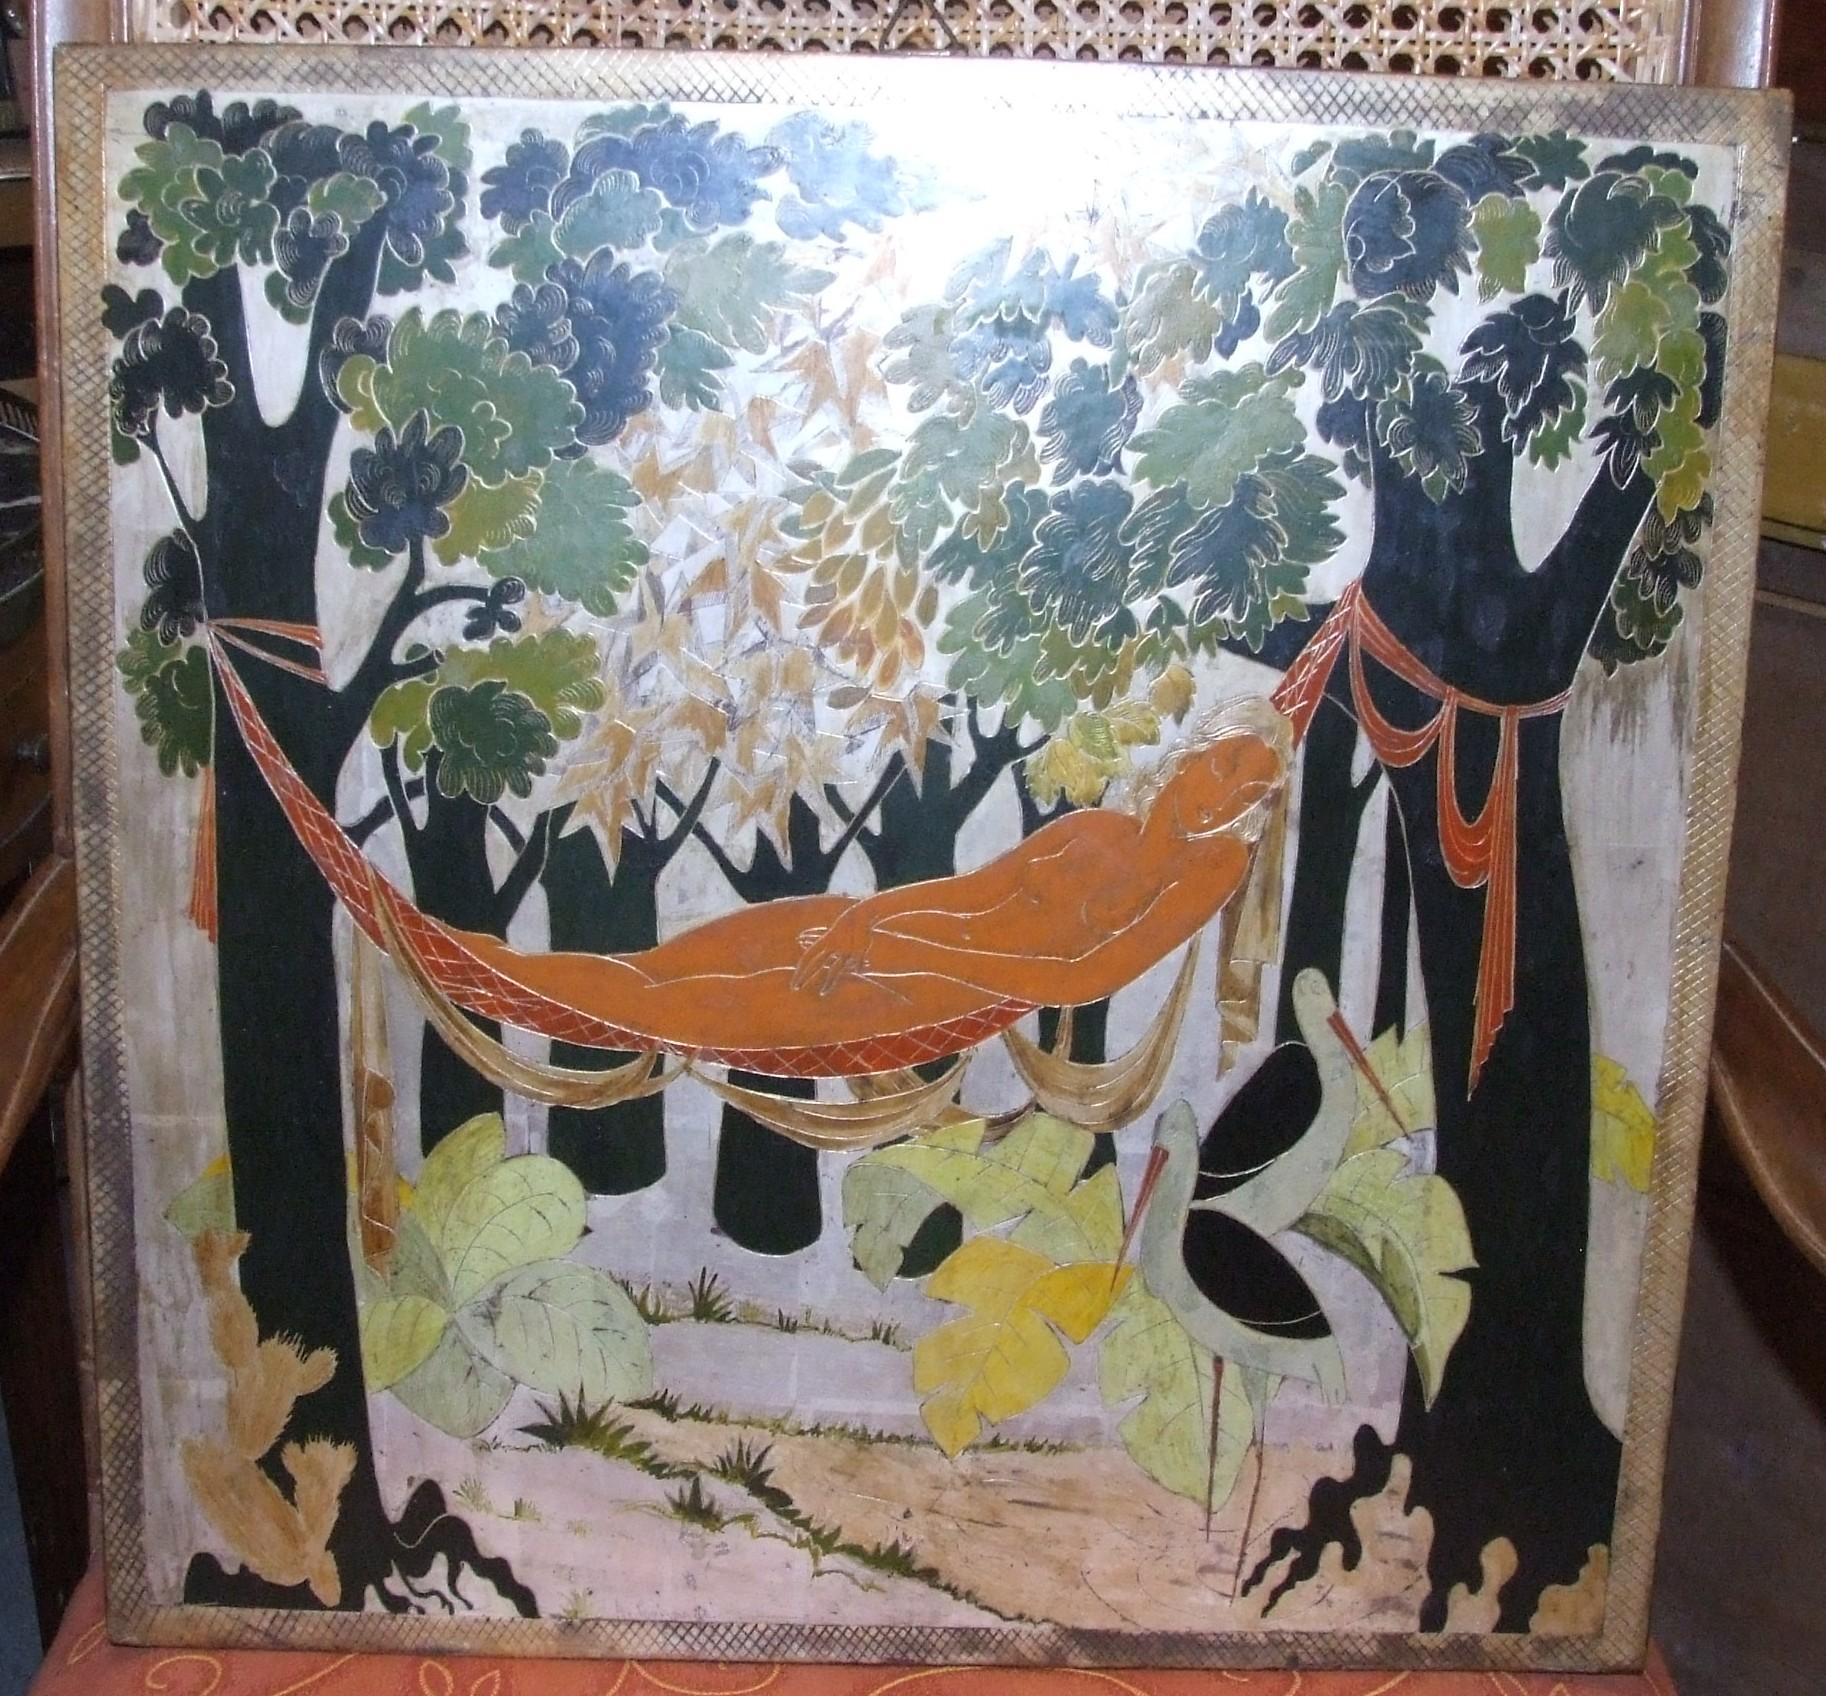 woman in the wood, '30s - lacquer on wood panel, 50x51 cm. - Painting by A. Cavenago